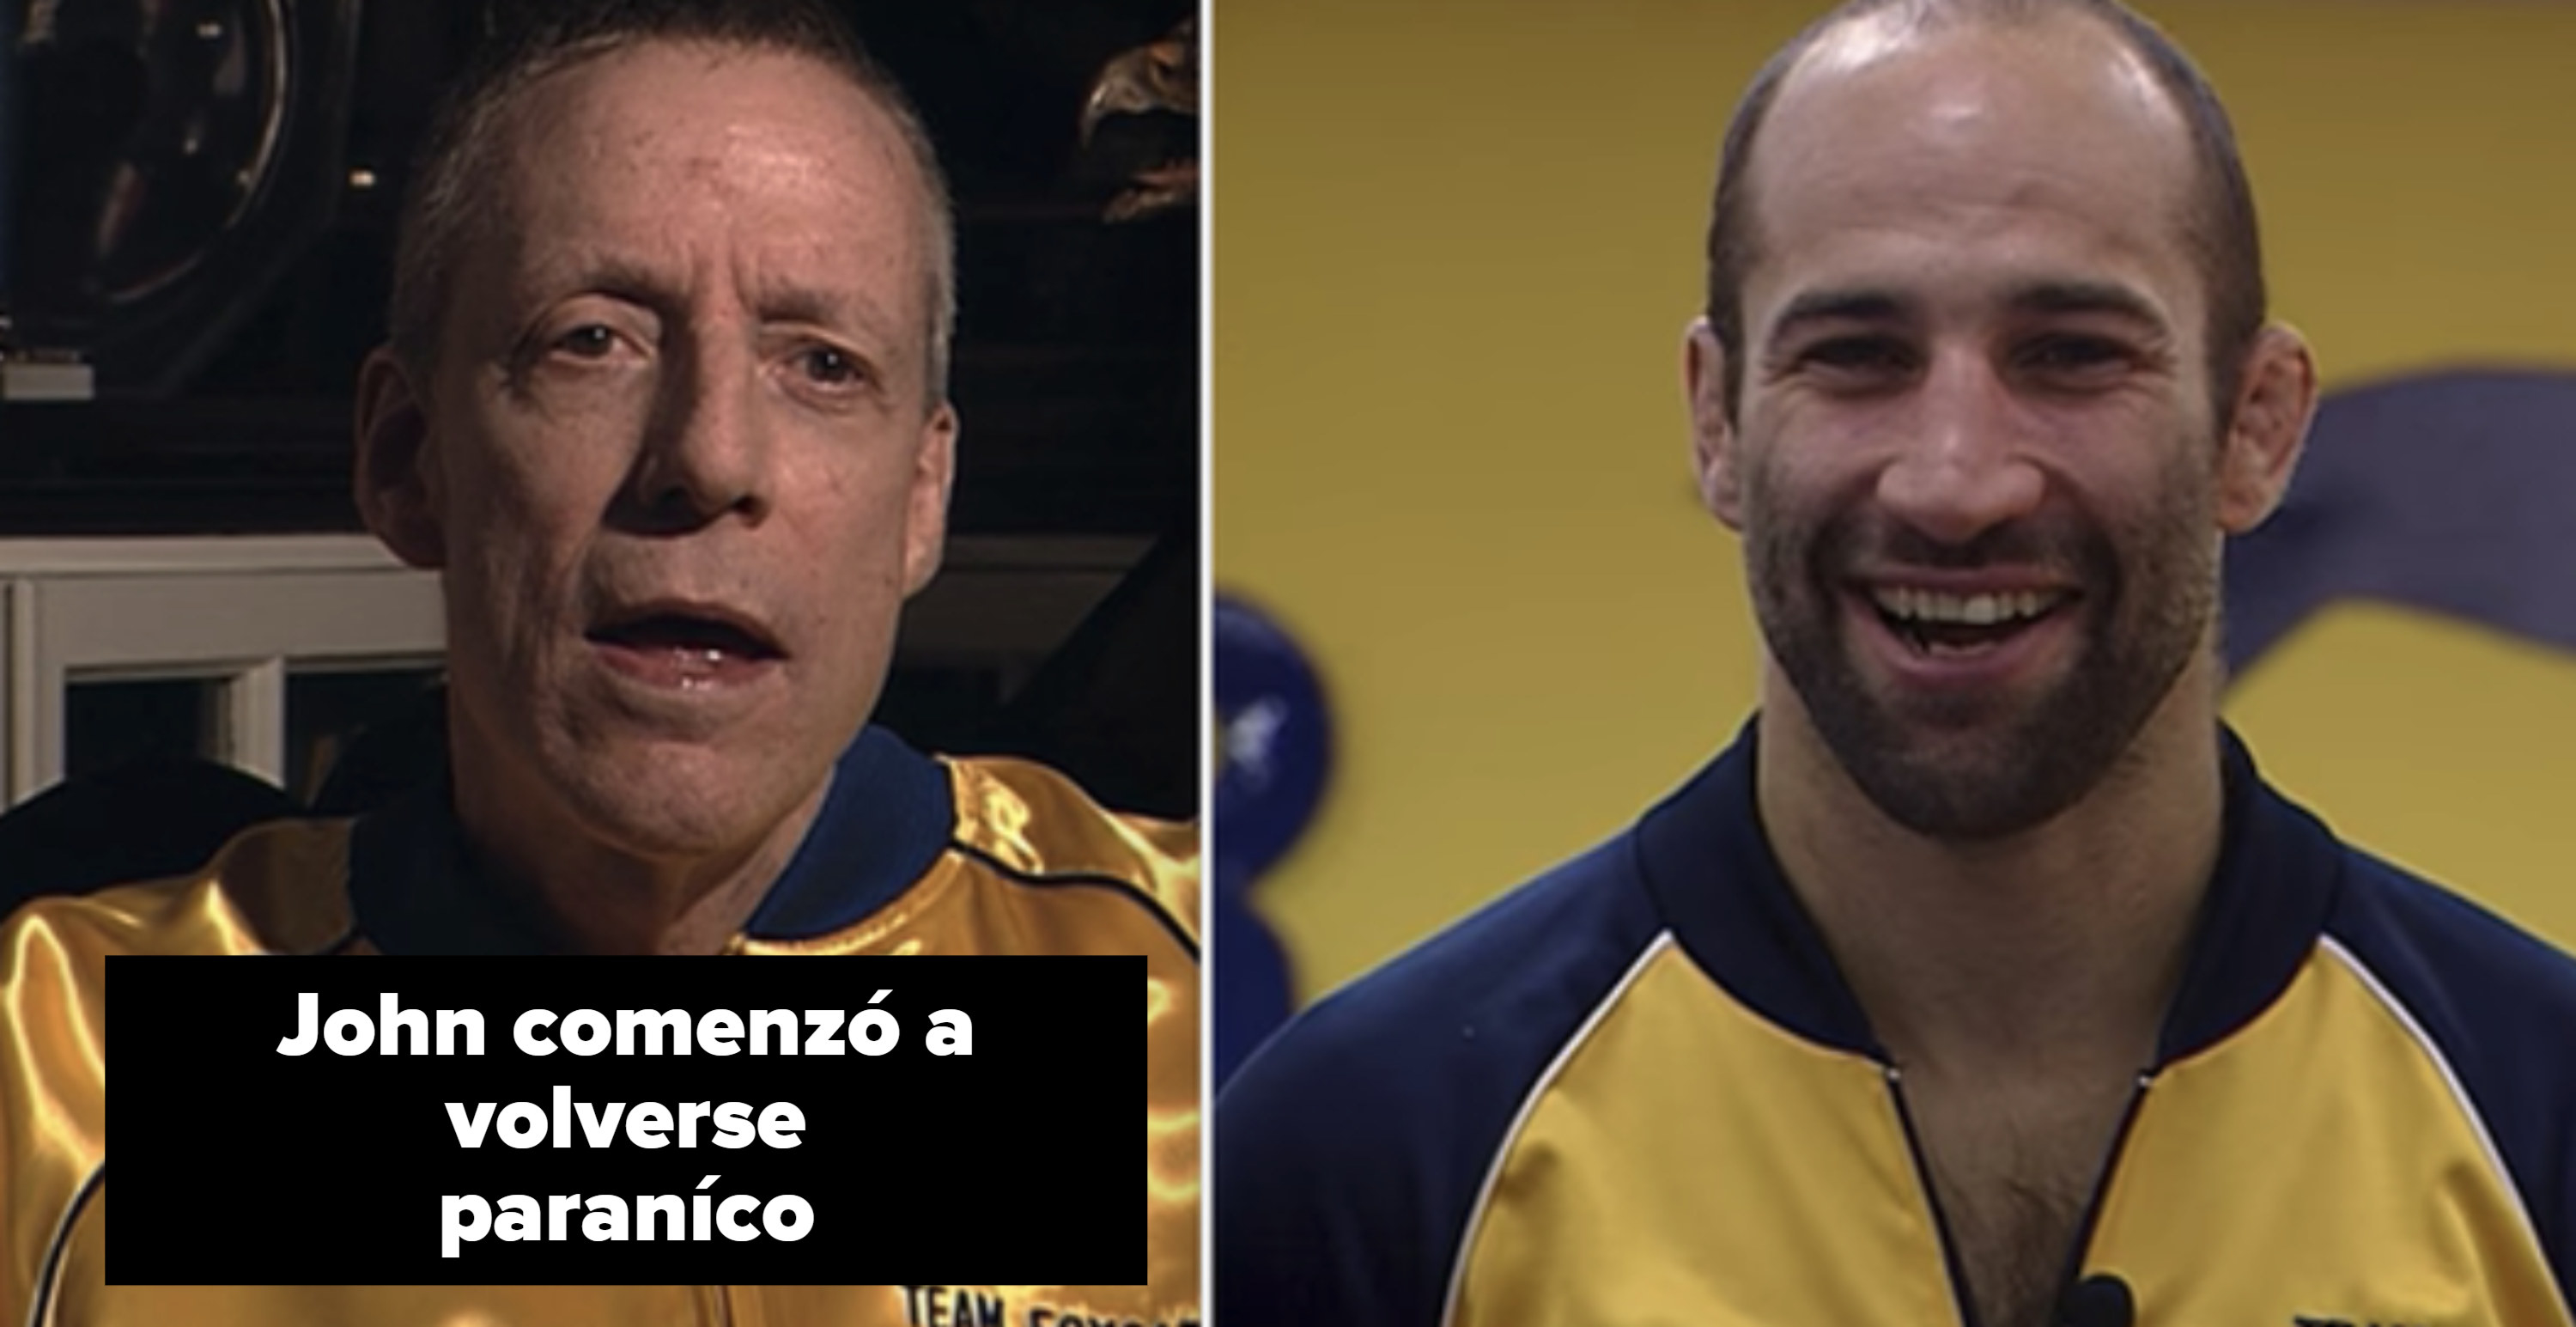 Side-by-side of John du Pont and Dave Schultz in their wrestling team jackets